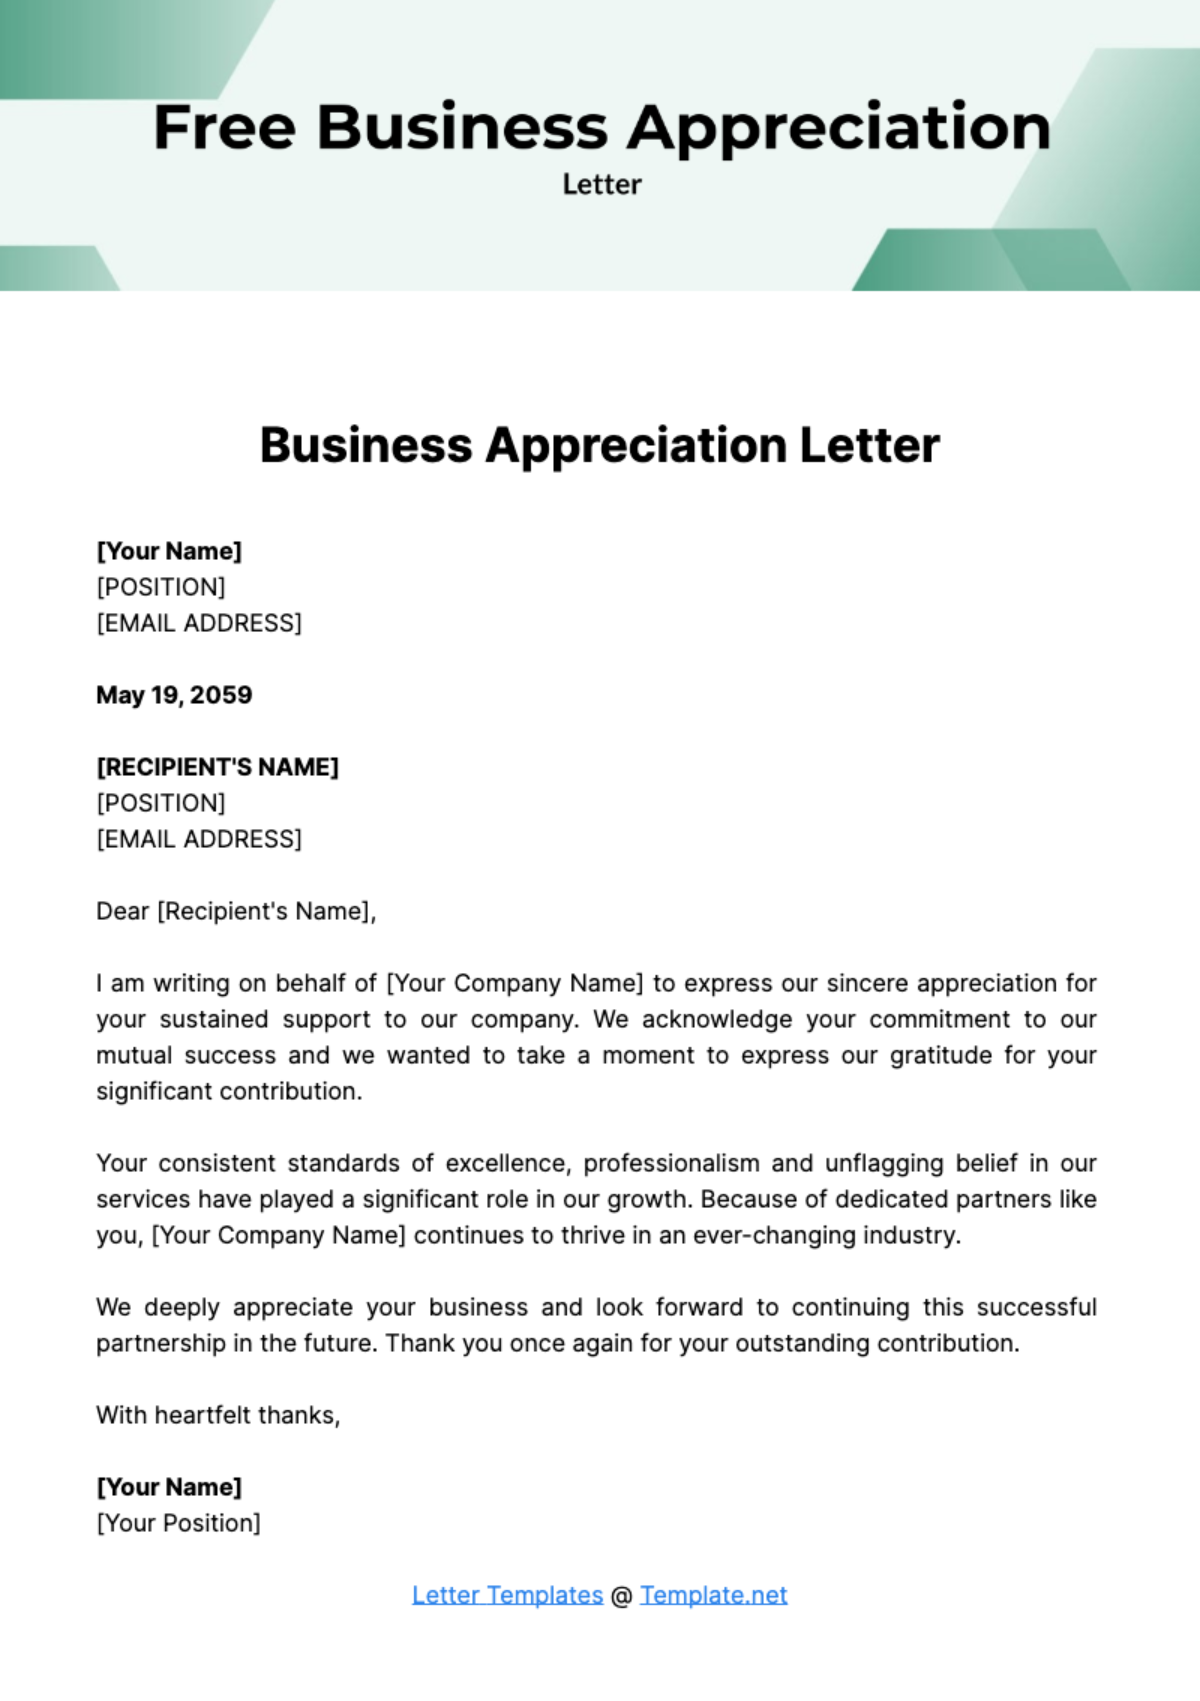 Free Business Appreciation Letter Template